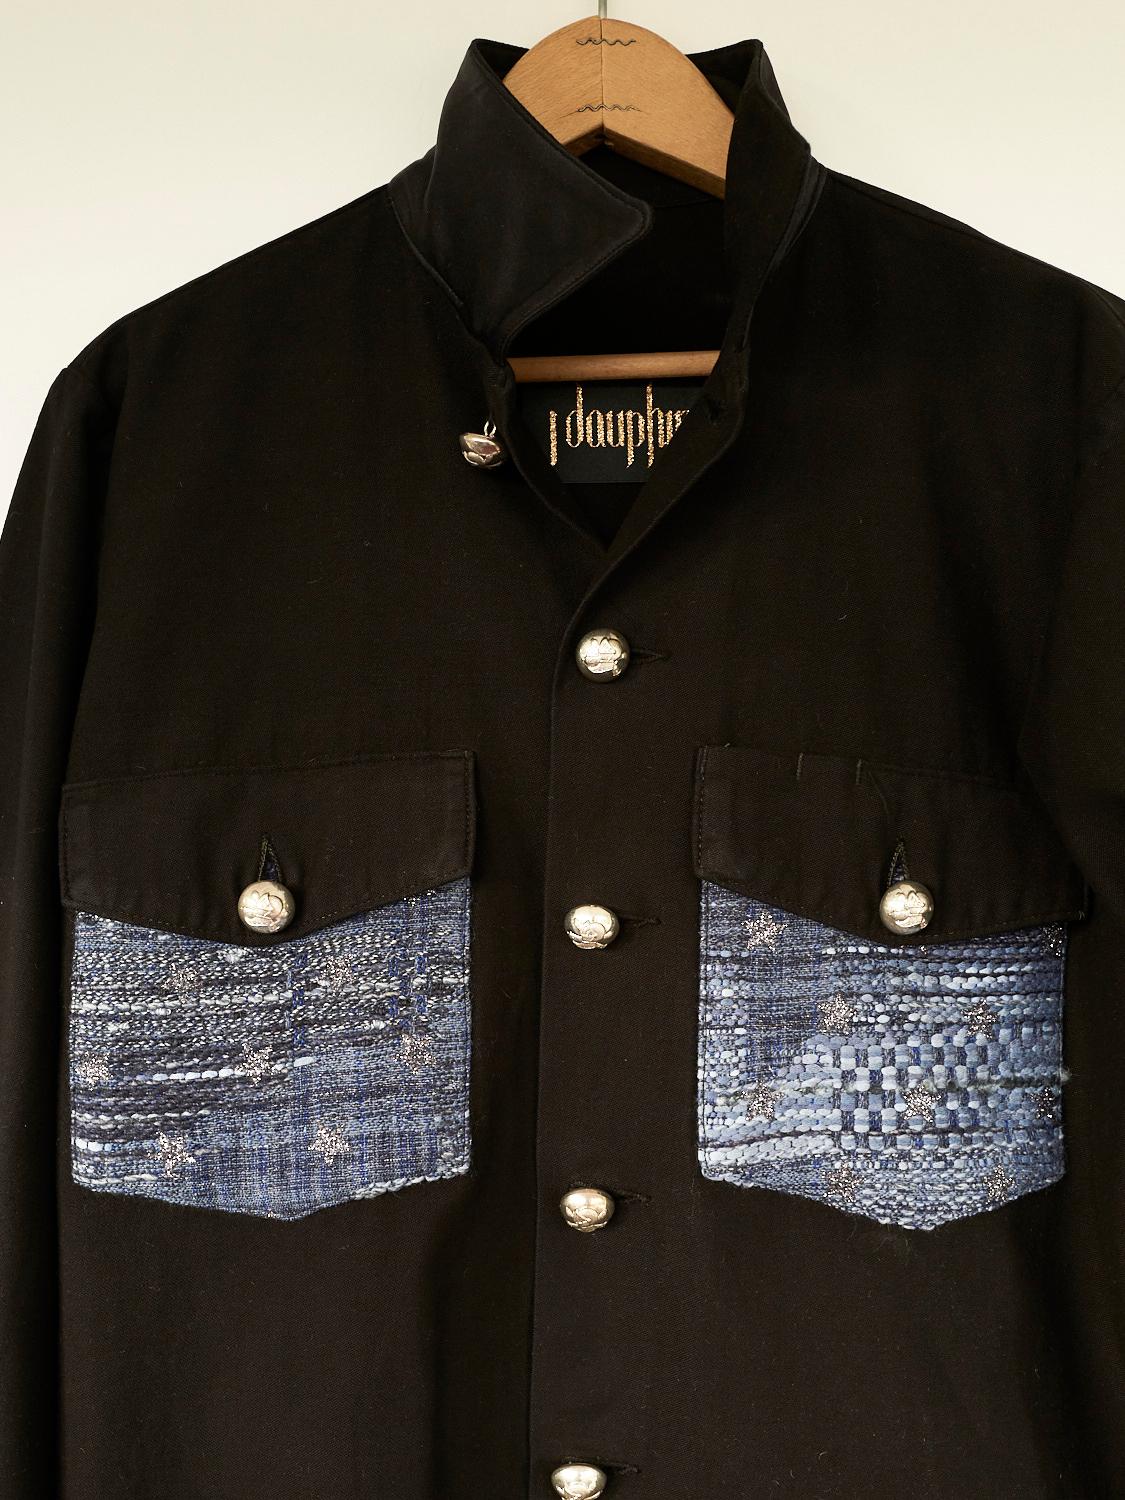 Embellished Jacket French Glitter Tweed Black Military Silver Buttons J Dauphin
Repurposed Vintage, Sustainable Luxury

Our Up-cycled Vintage Jackets are made from vintage, natural fibers, military clothing and french workwear from the period